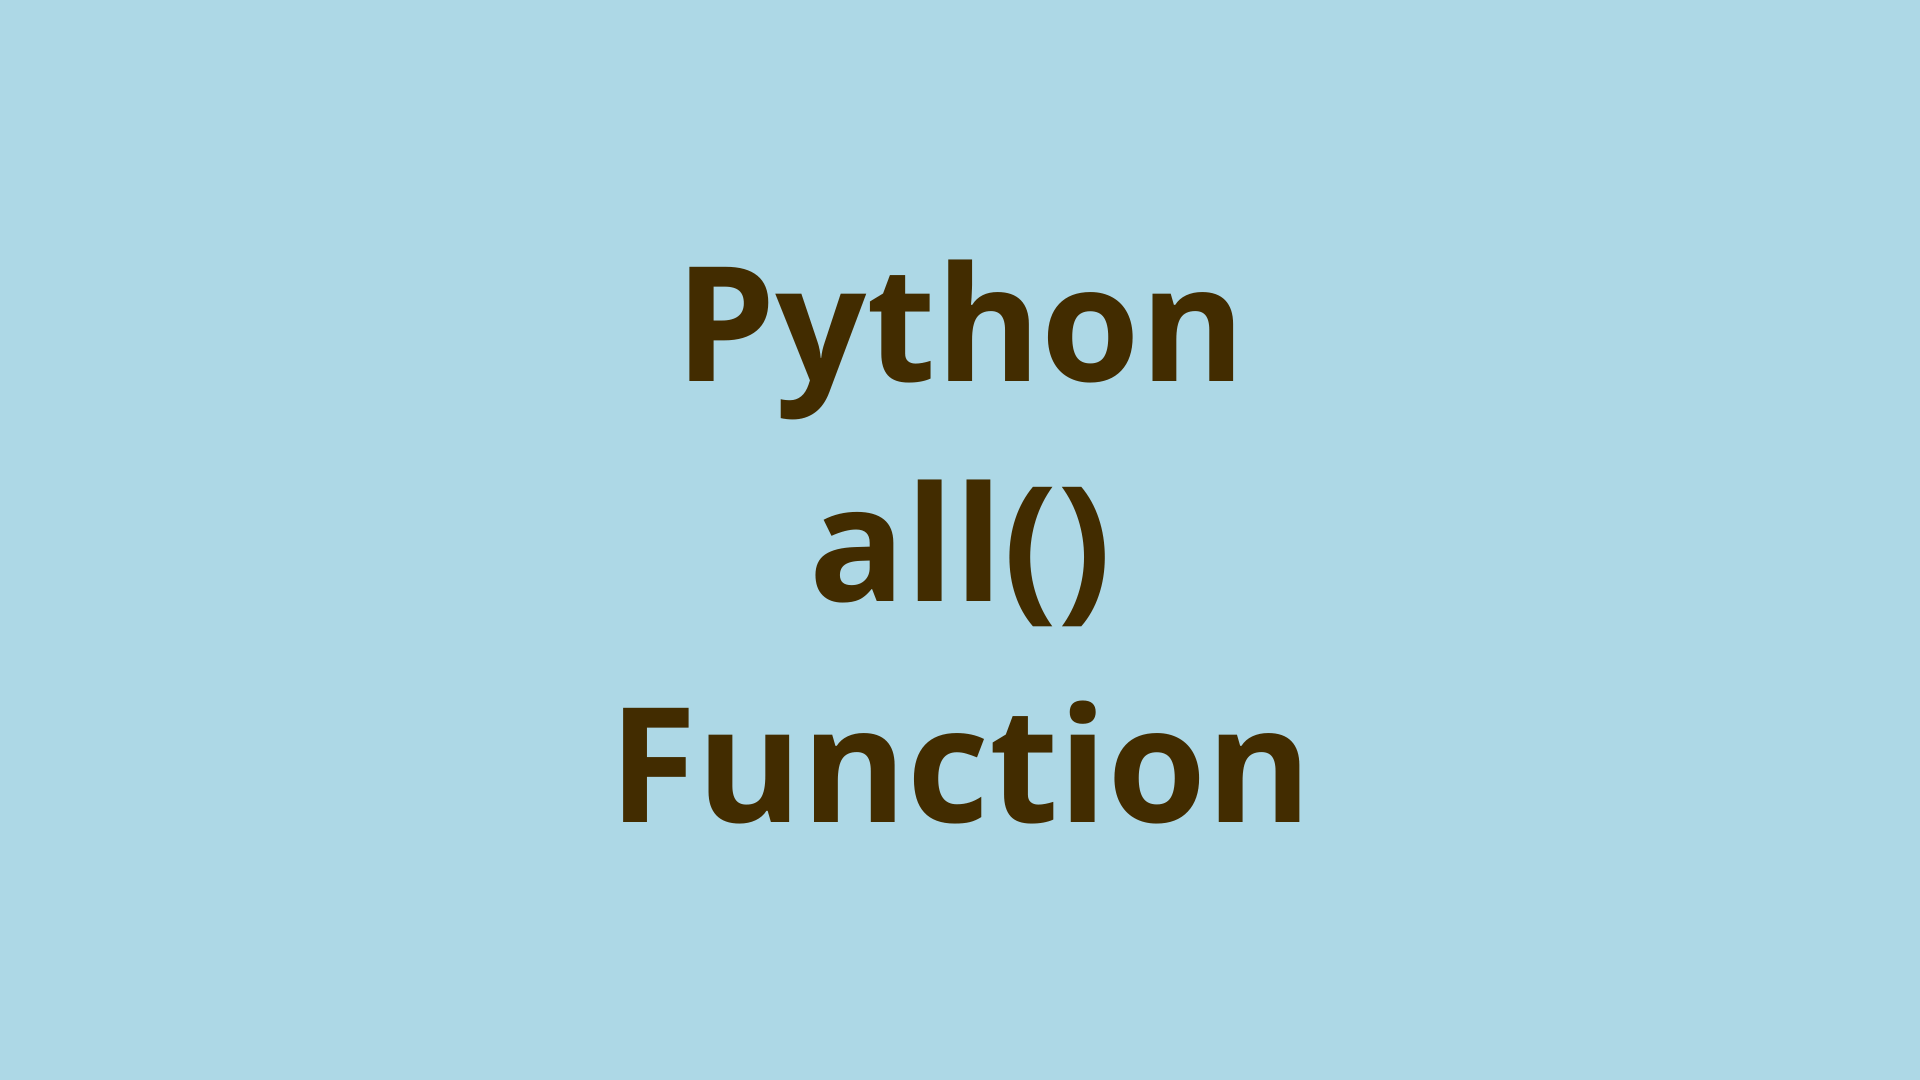 Image of Python all() Function